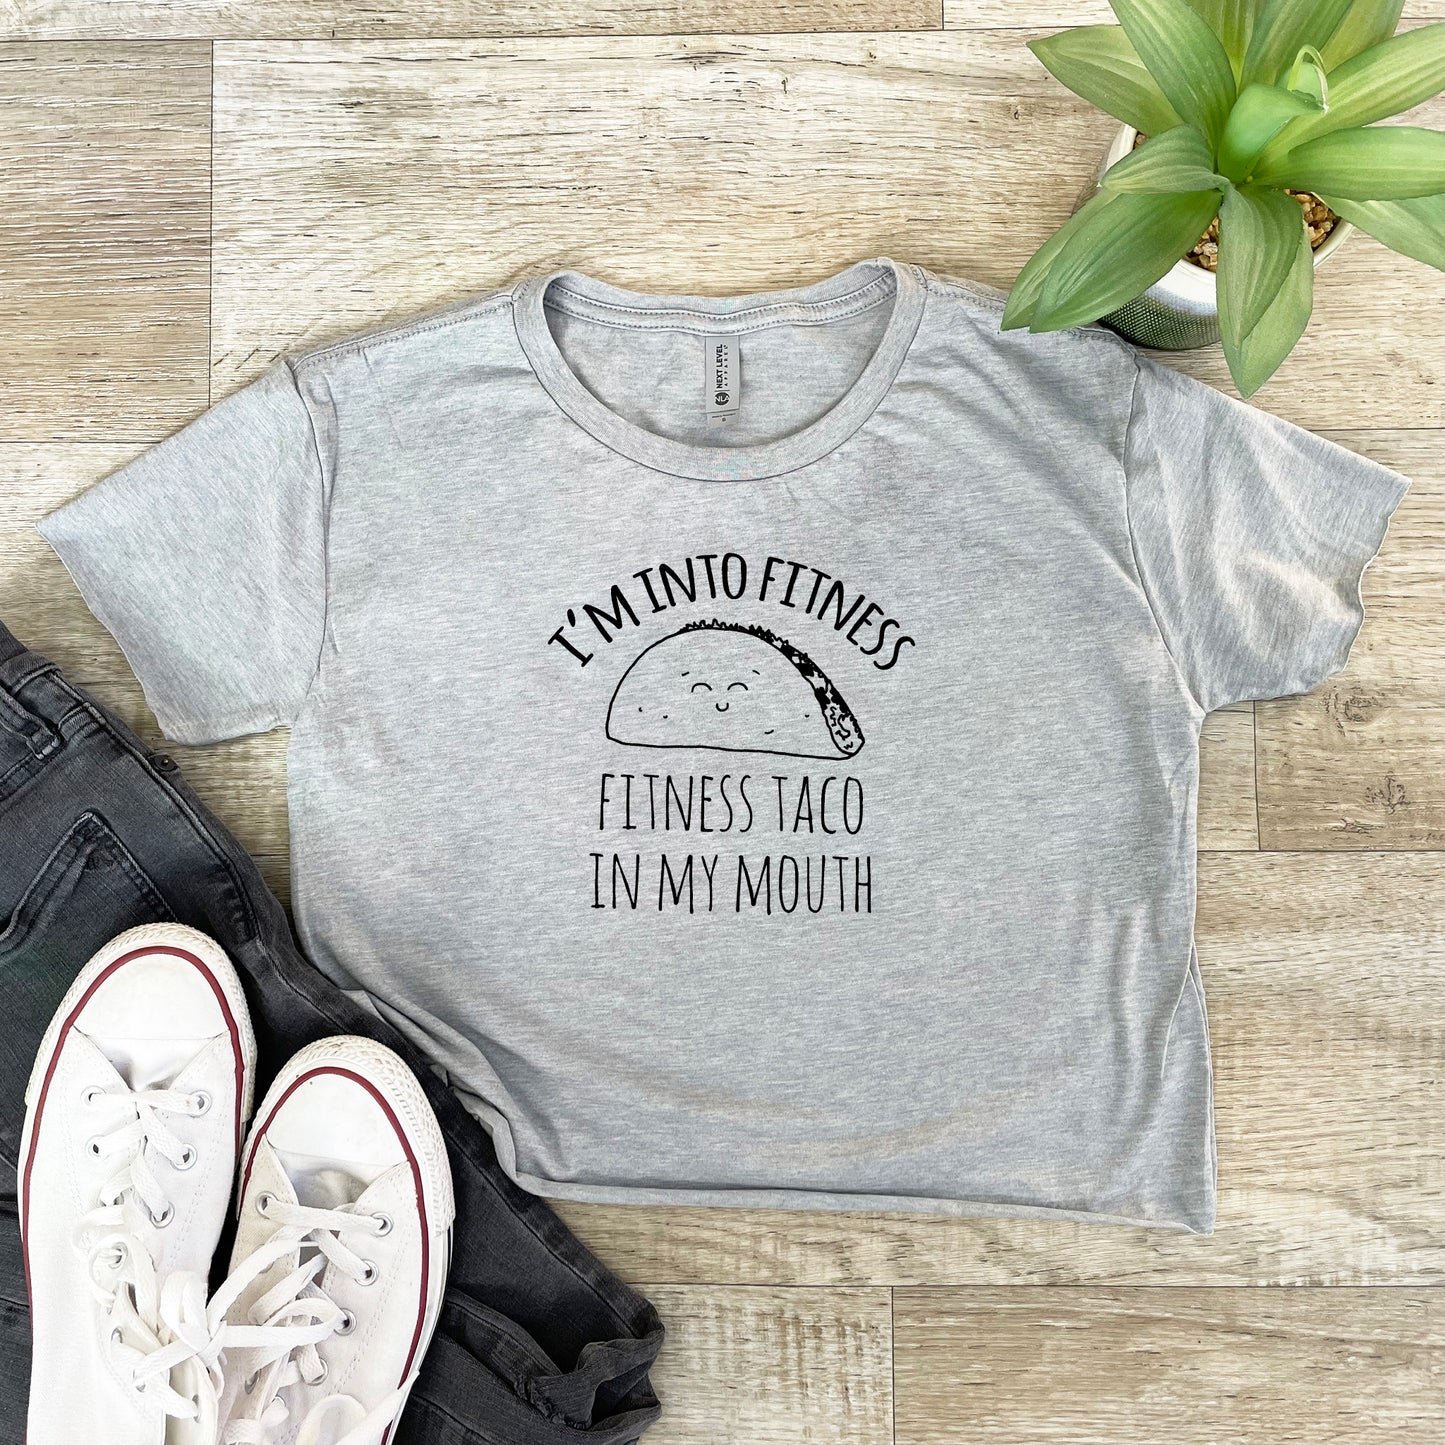 I'm Into Fitness, Fitness Taco In My Mouth - Women's Crop Tee - Heather Gray or Gold